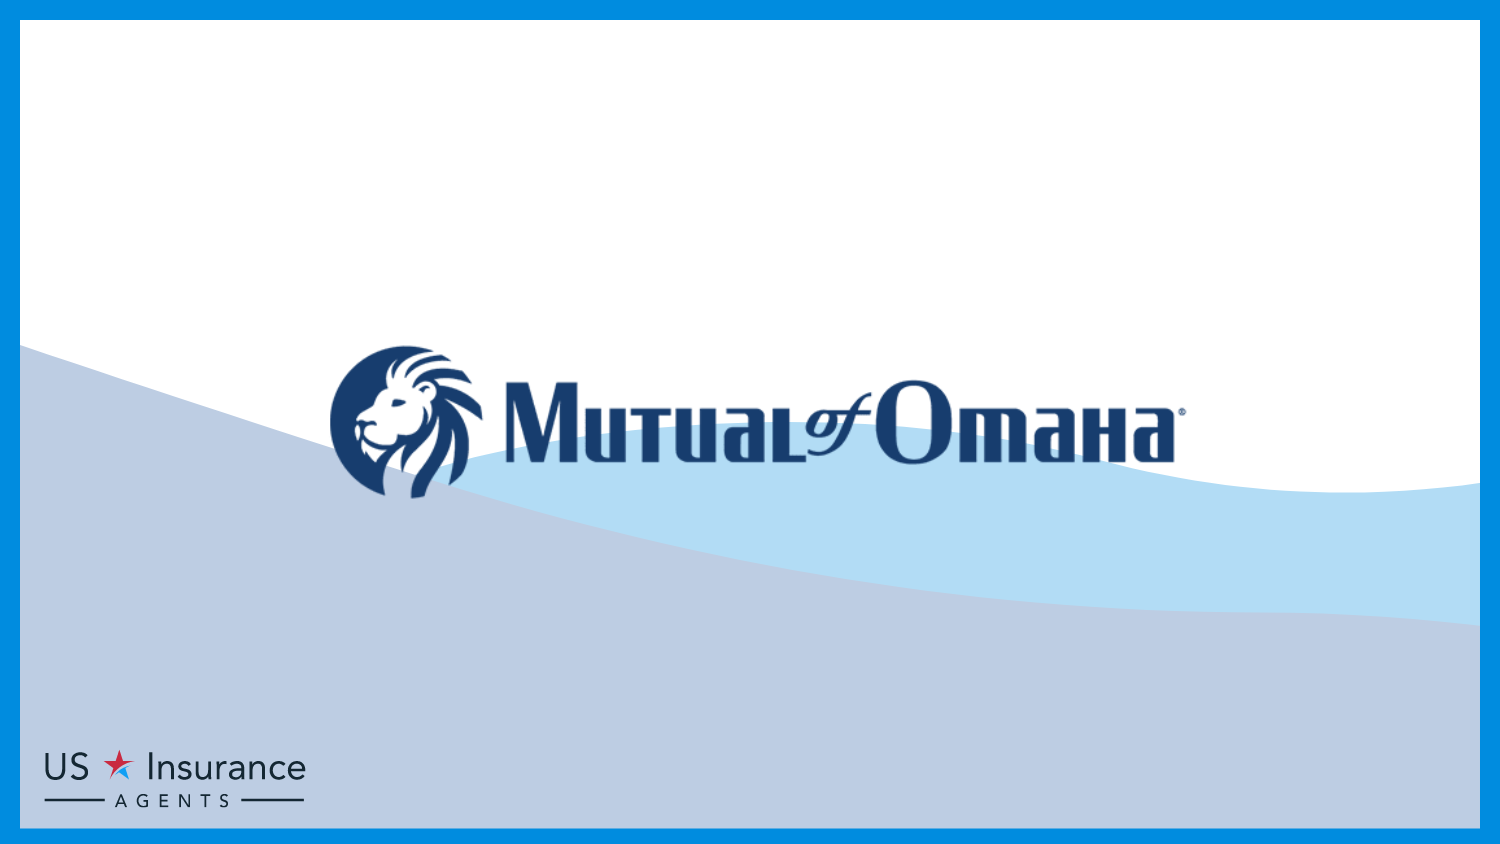 Mutual of Omaha: Best Life Insurance for People With Cystic Fibrosis